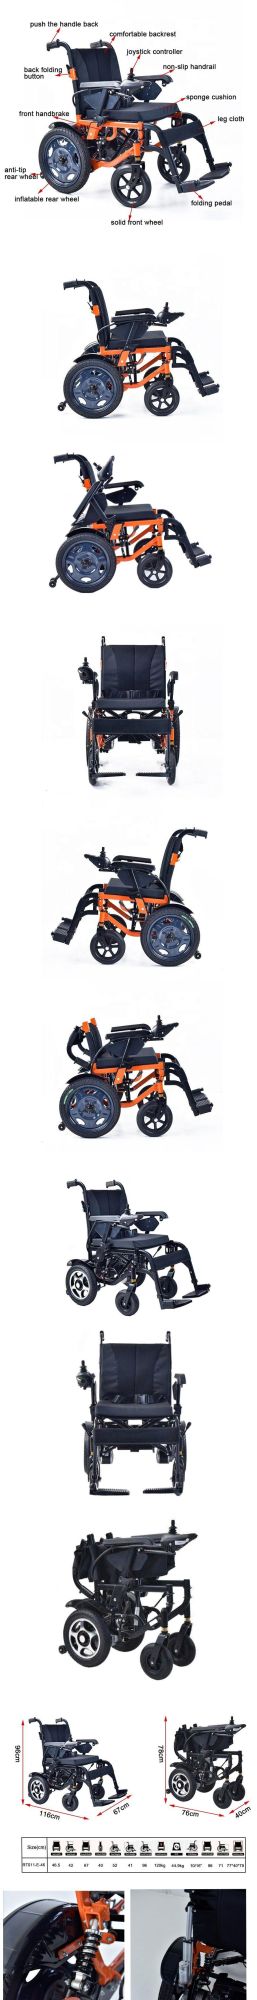 Shock Absorber Type Electric Power Wheelchair Fold Steel Wheelchair for Disabled